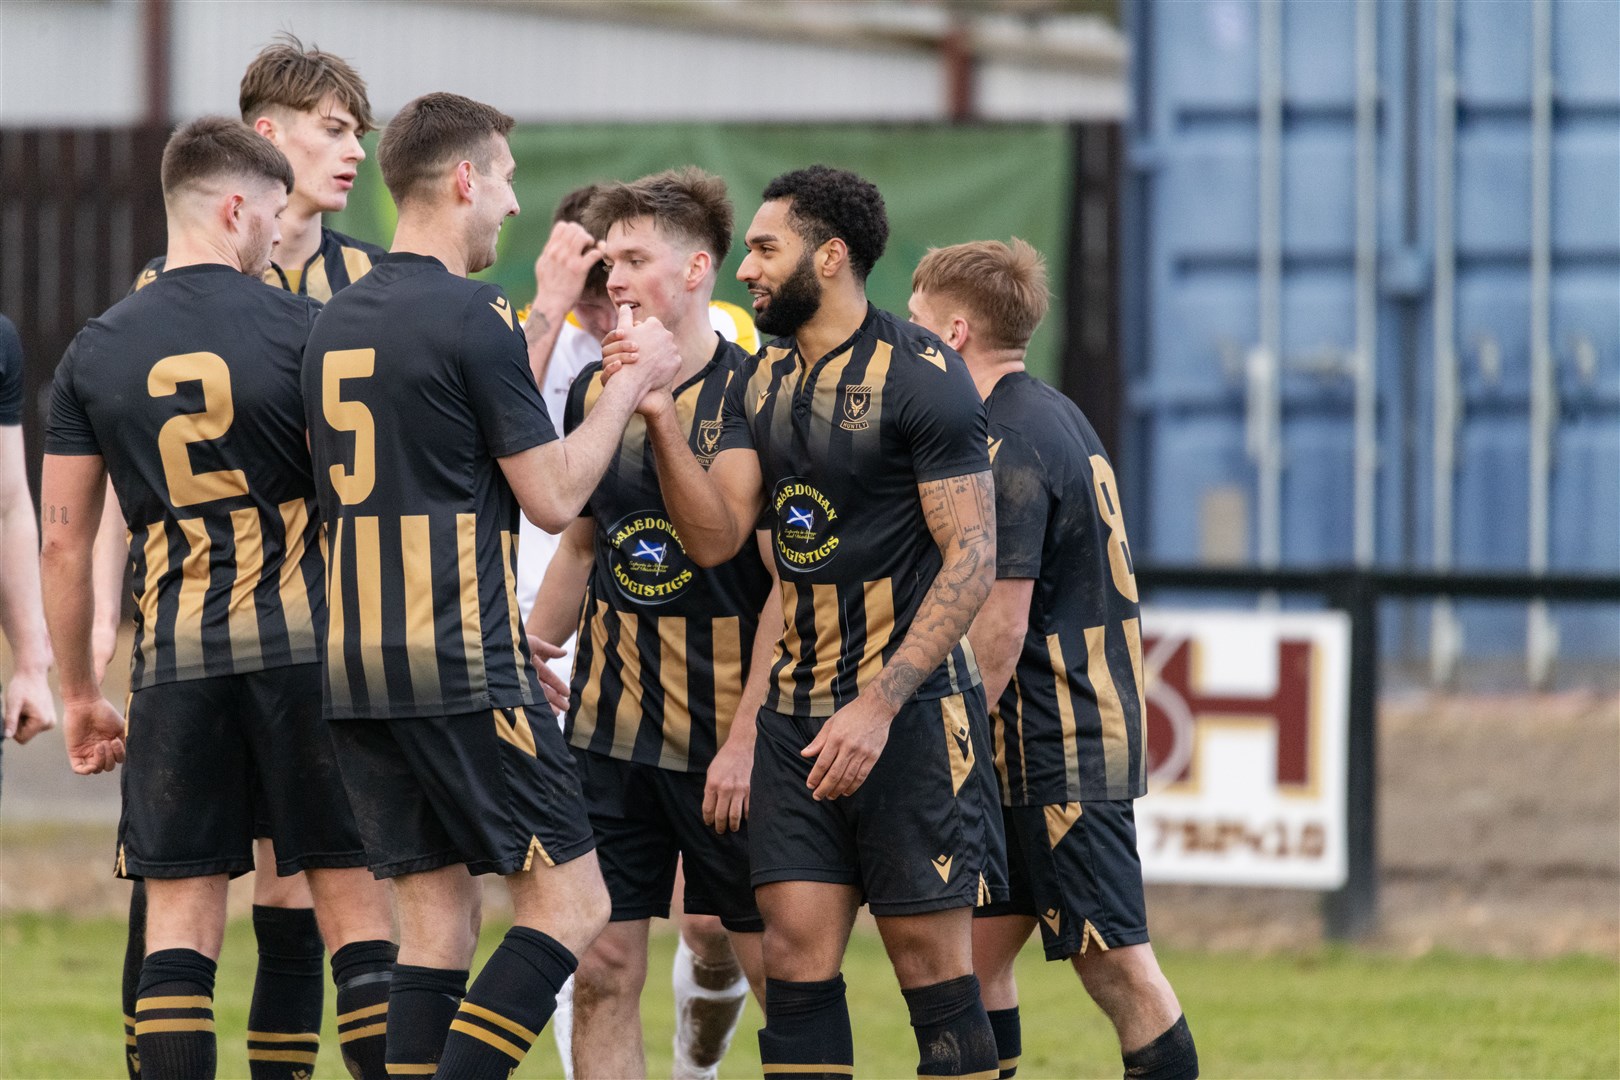 Huntly celebrates Robbie Foster's hat-trick. ..Huntly F.C. (3) v Forres Mechanics F.C. (0) at Christie Park, Huntly - Highland Football League 23/24. ..Picture: Beth Taylor.